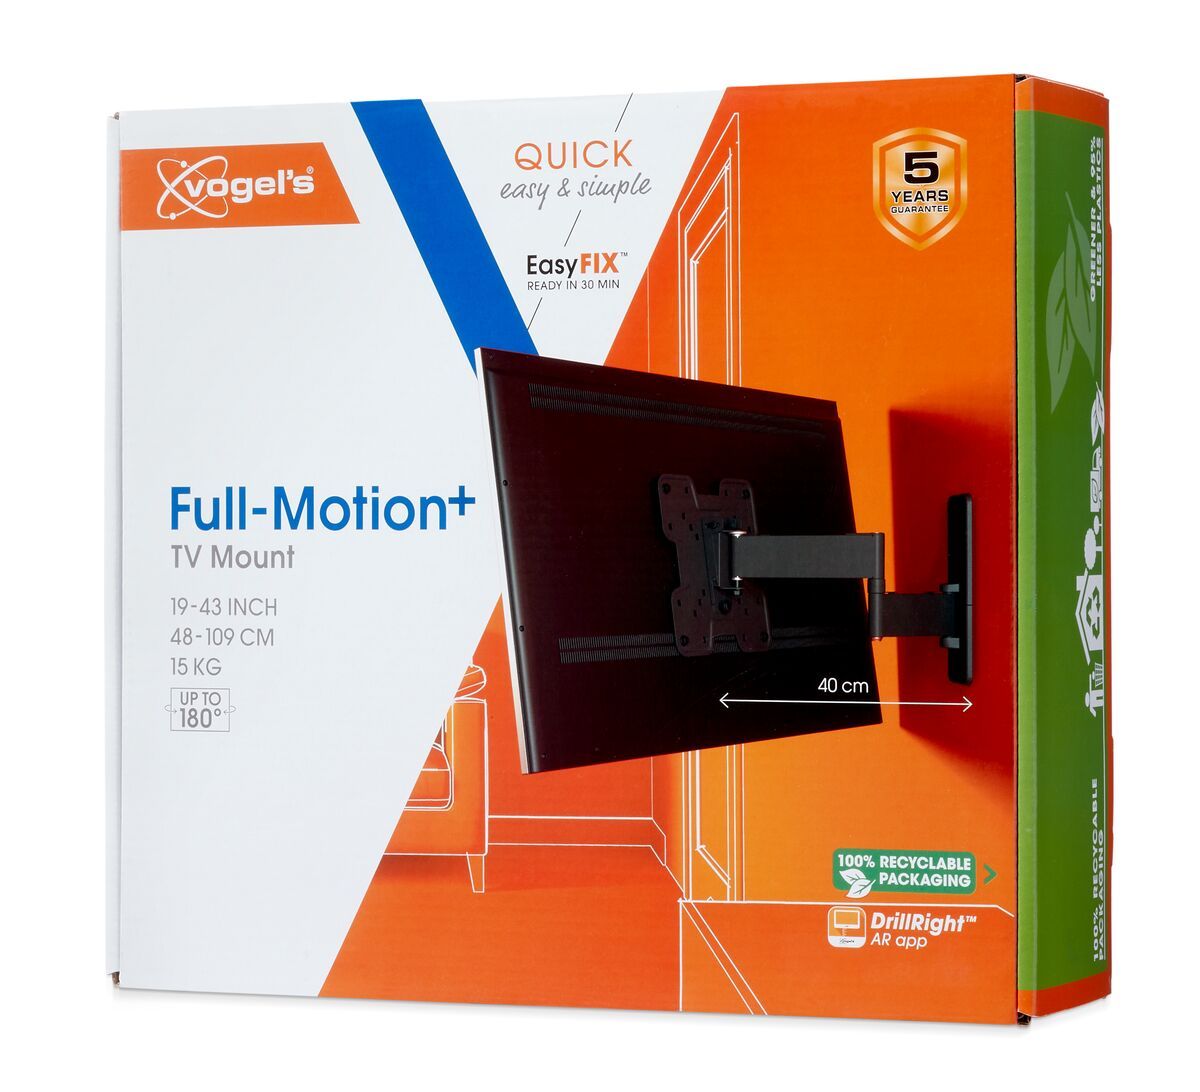 Vogel's TVM 1245 Full-Motion TV Wall Mount - Suitable for 19 up to 43 inch TVs - Full motion (up to 180°) swivel - Tilt up to 15° - Packaging